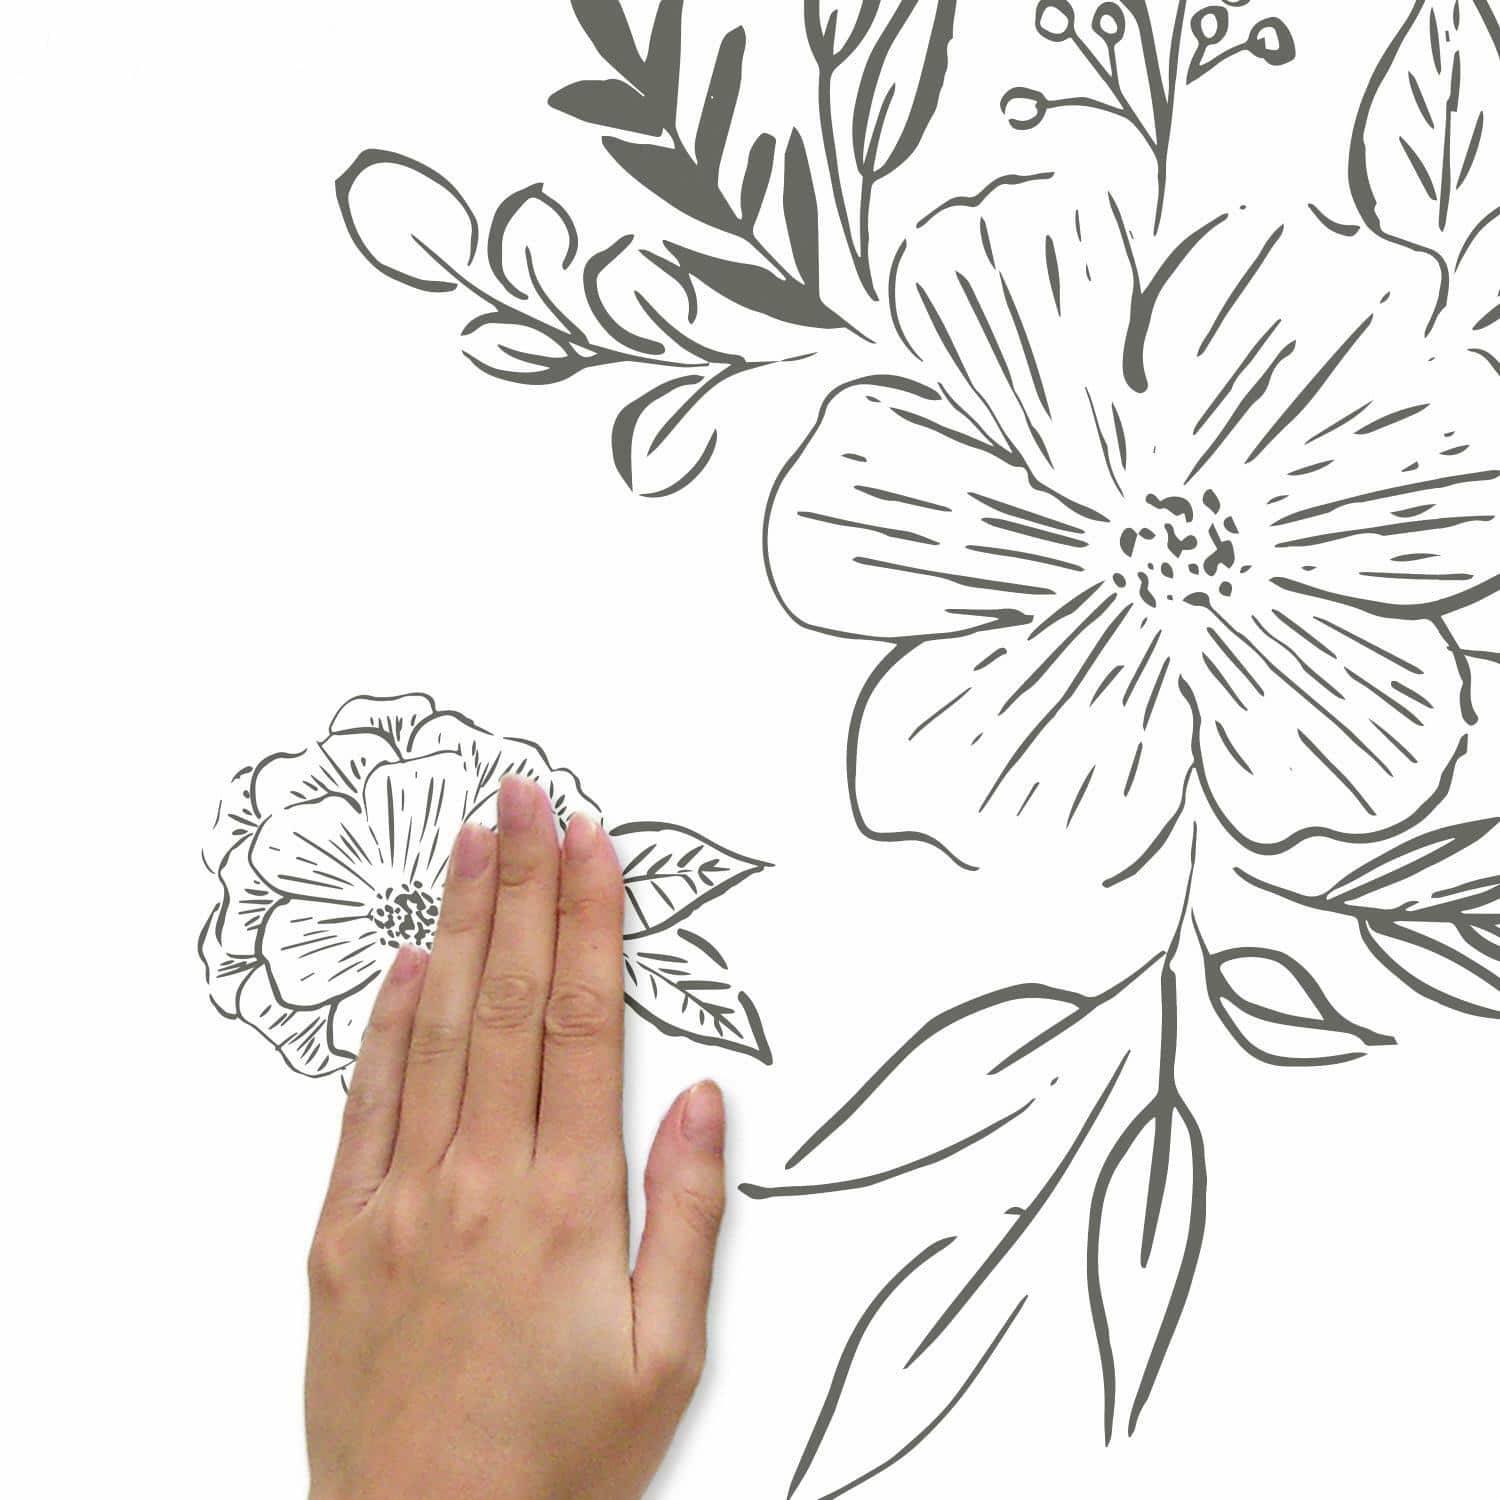 RoomMates Beth Schneider Floral Sketch Peel &#x26; Stick Giant Wall Decals